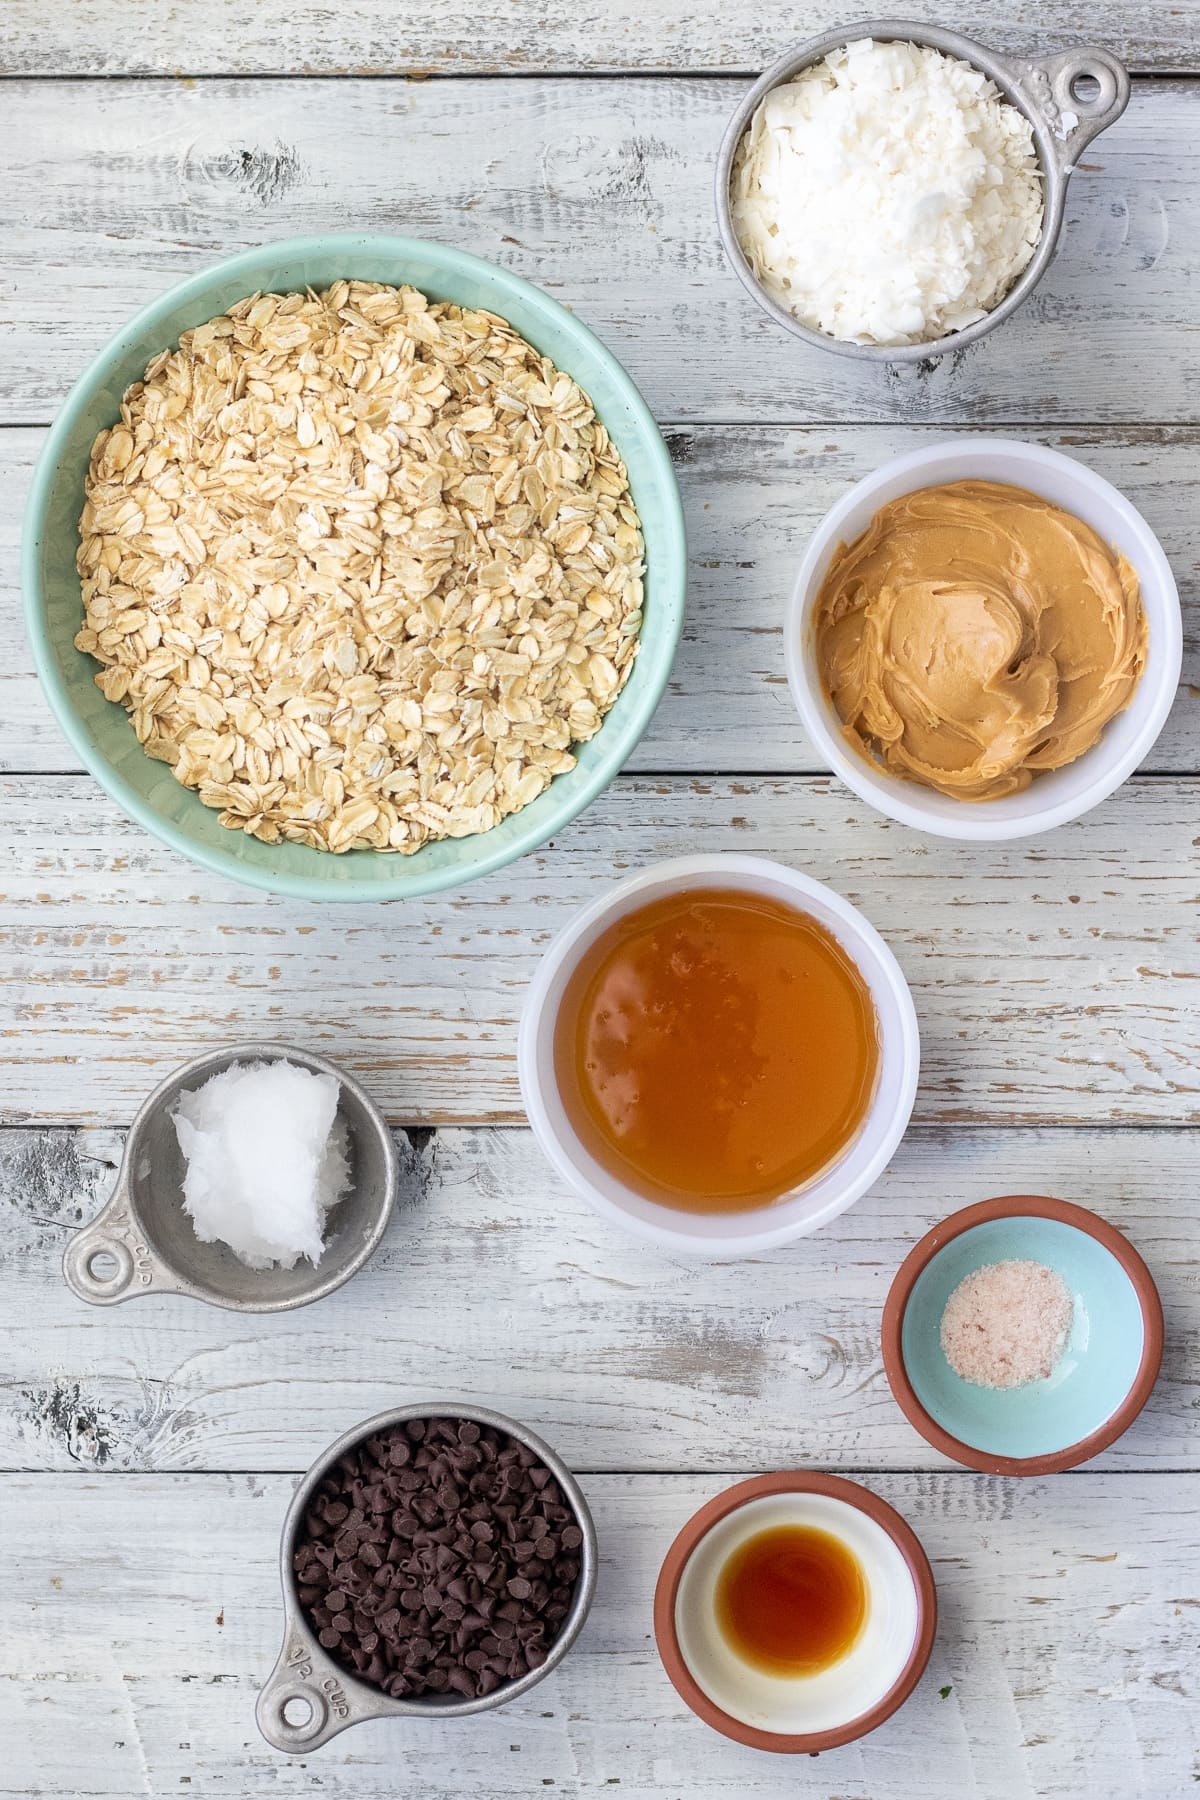 Ingredients for making your own chewy granola bars